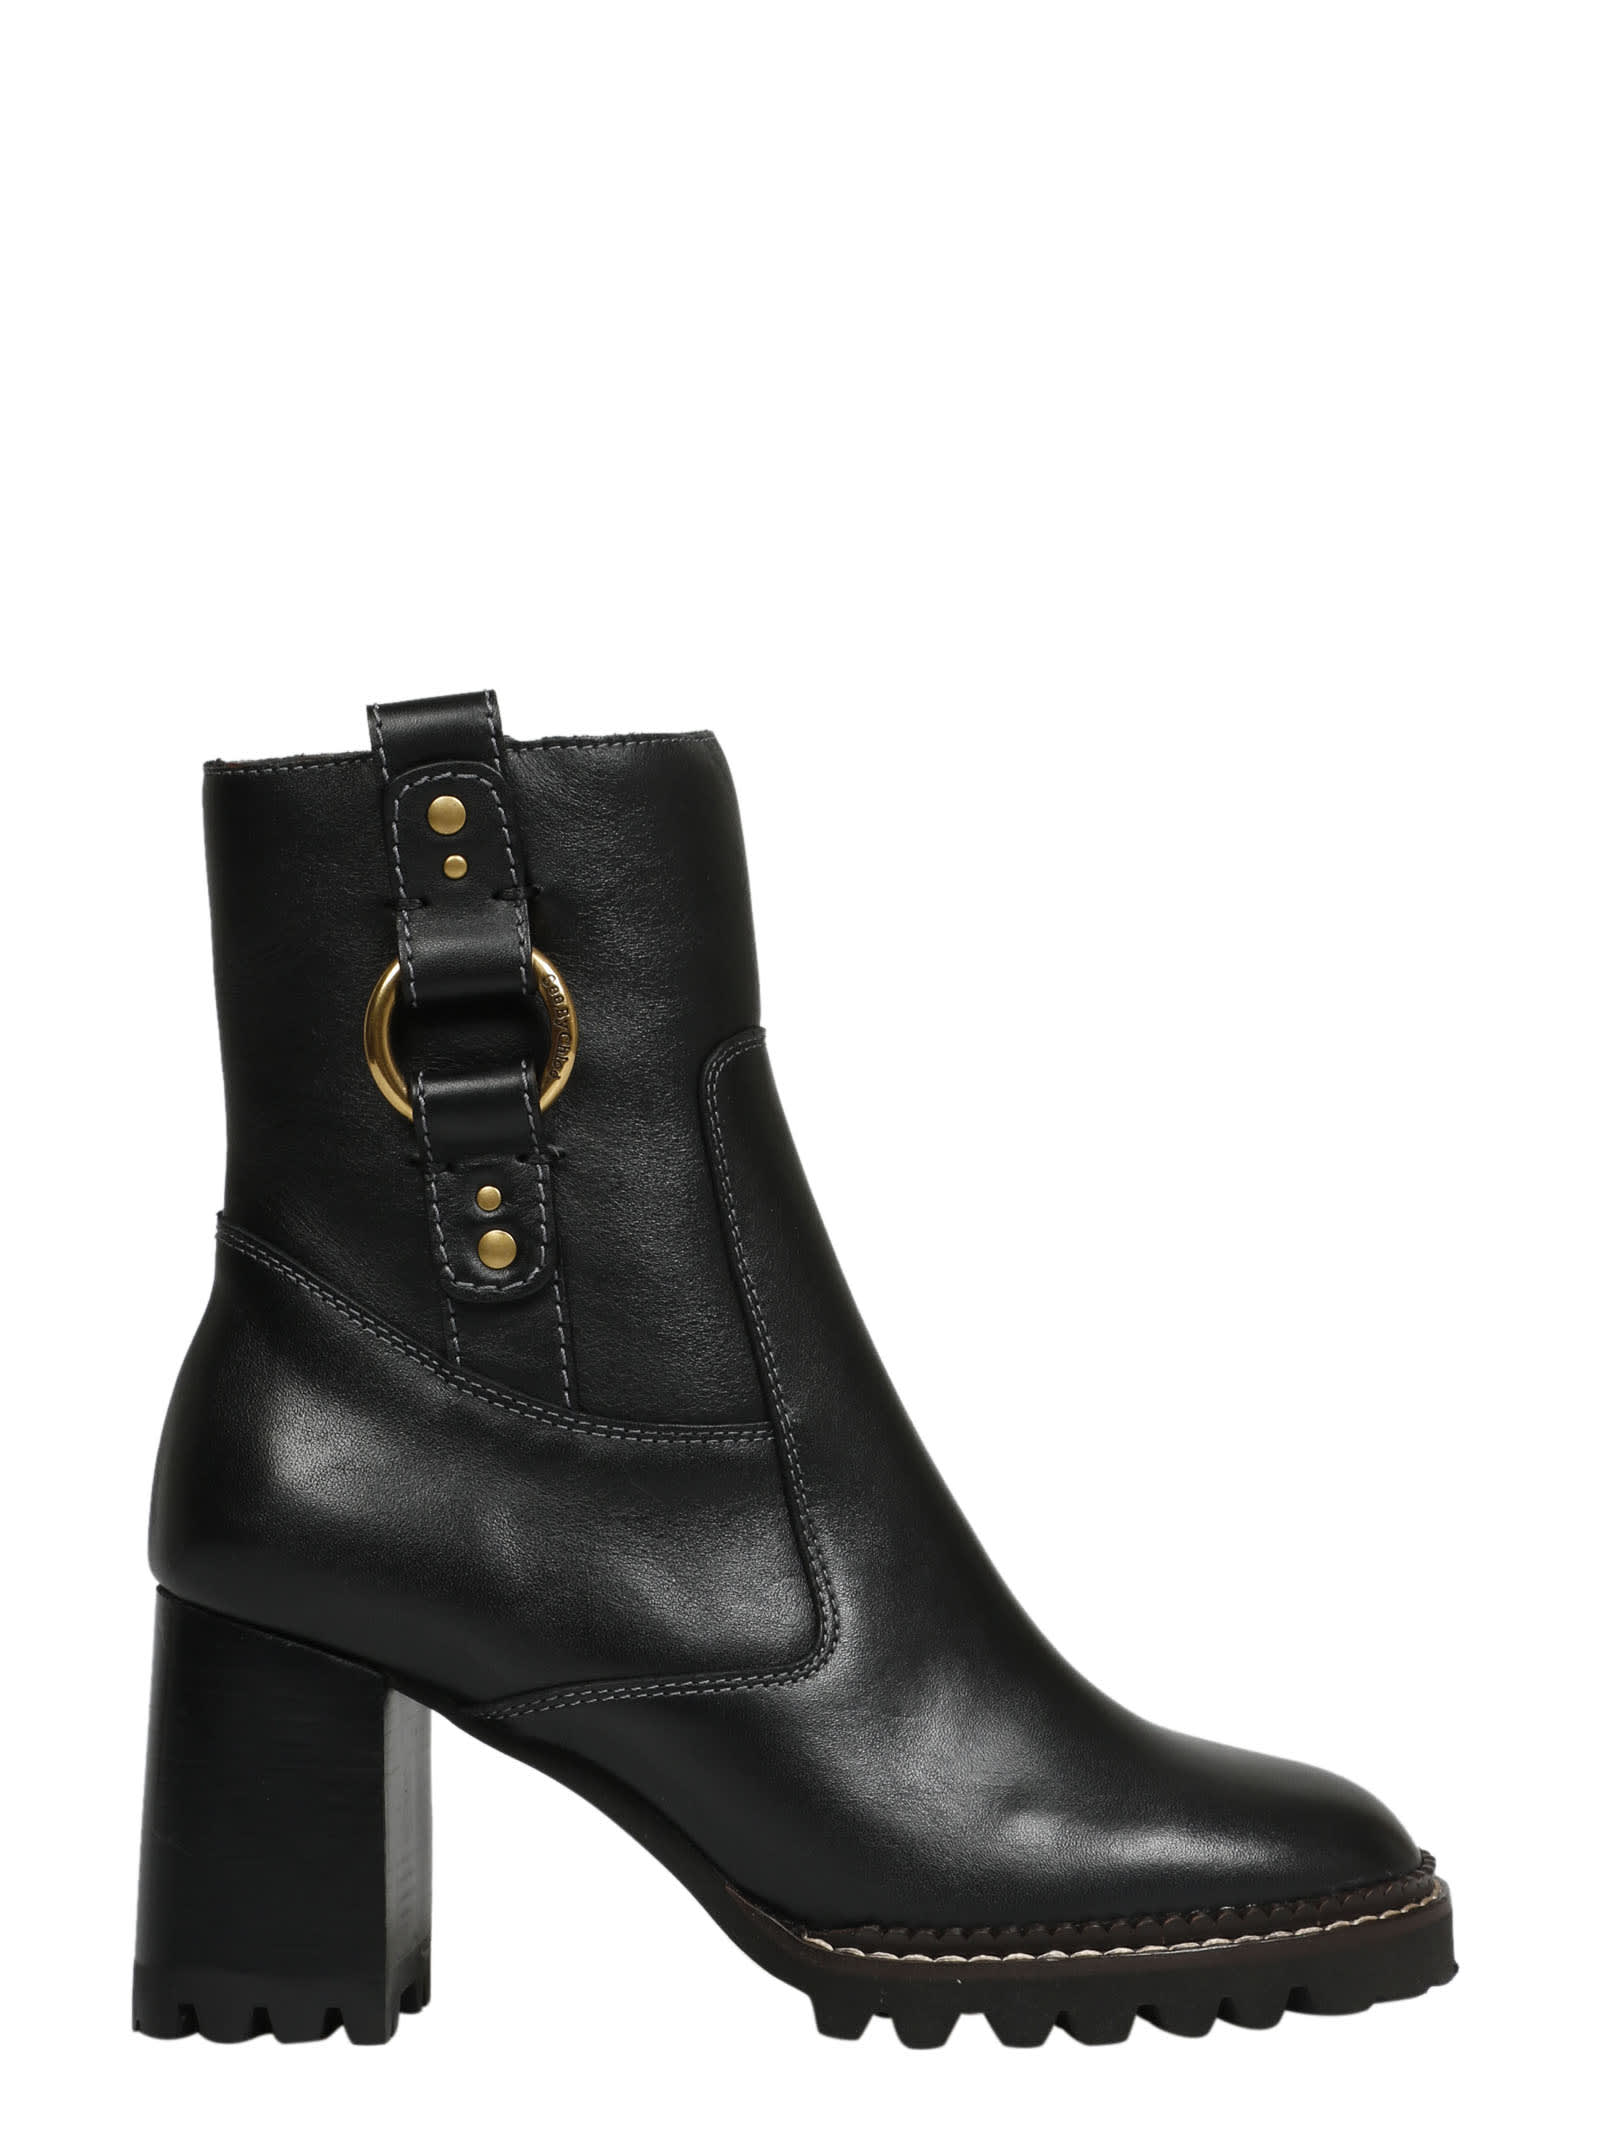 See by Chloé Leather Boots